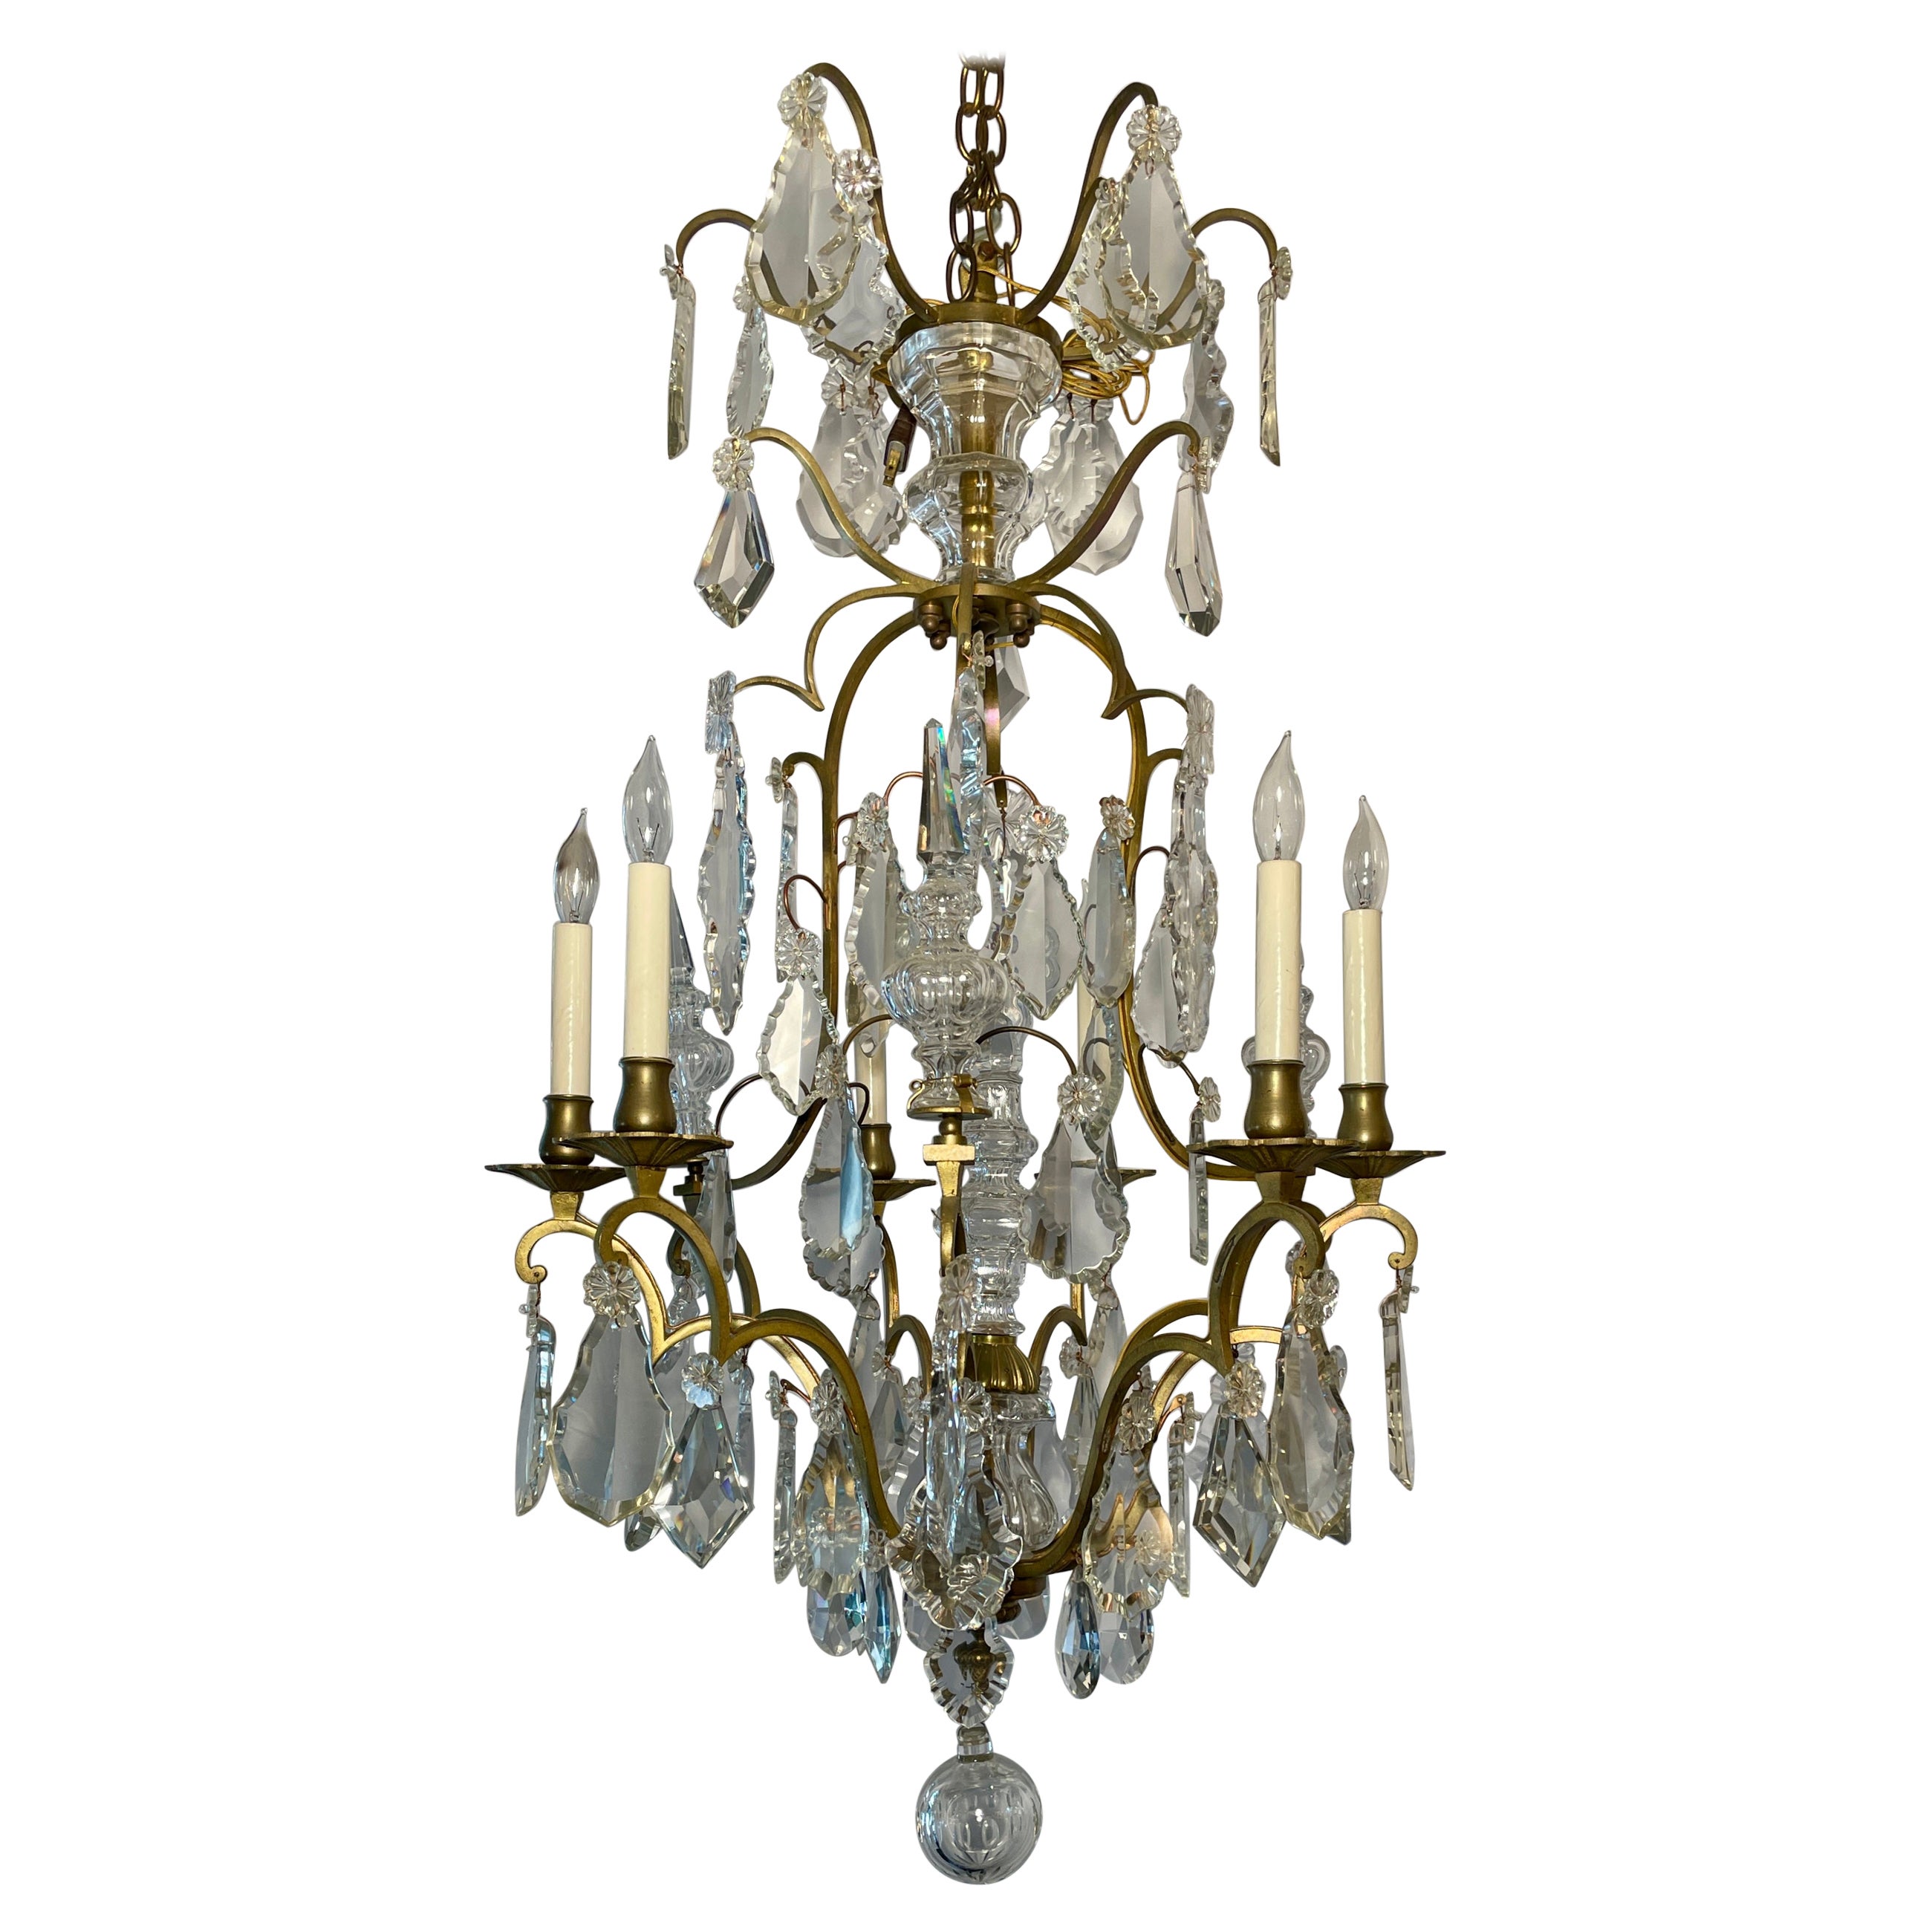 Antique French Baccarat Crystal and Bronze D' Ore Chandelier, circa 1880-1890 For Sale